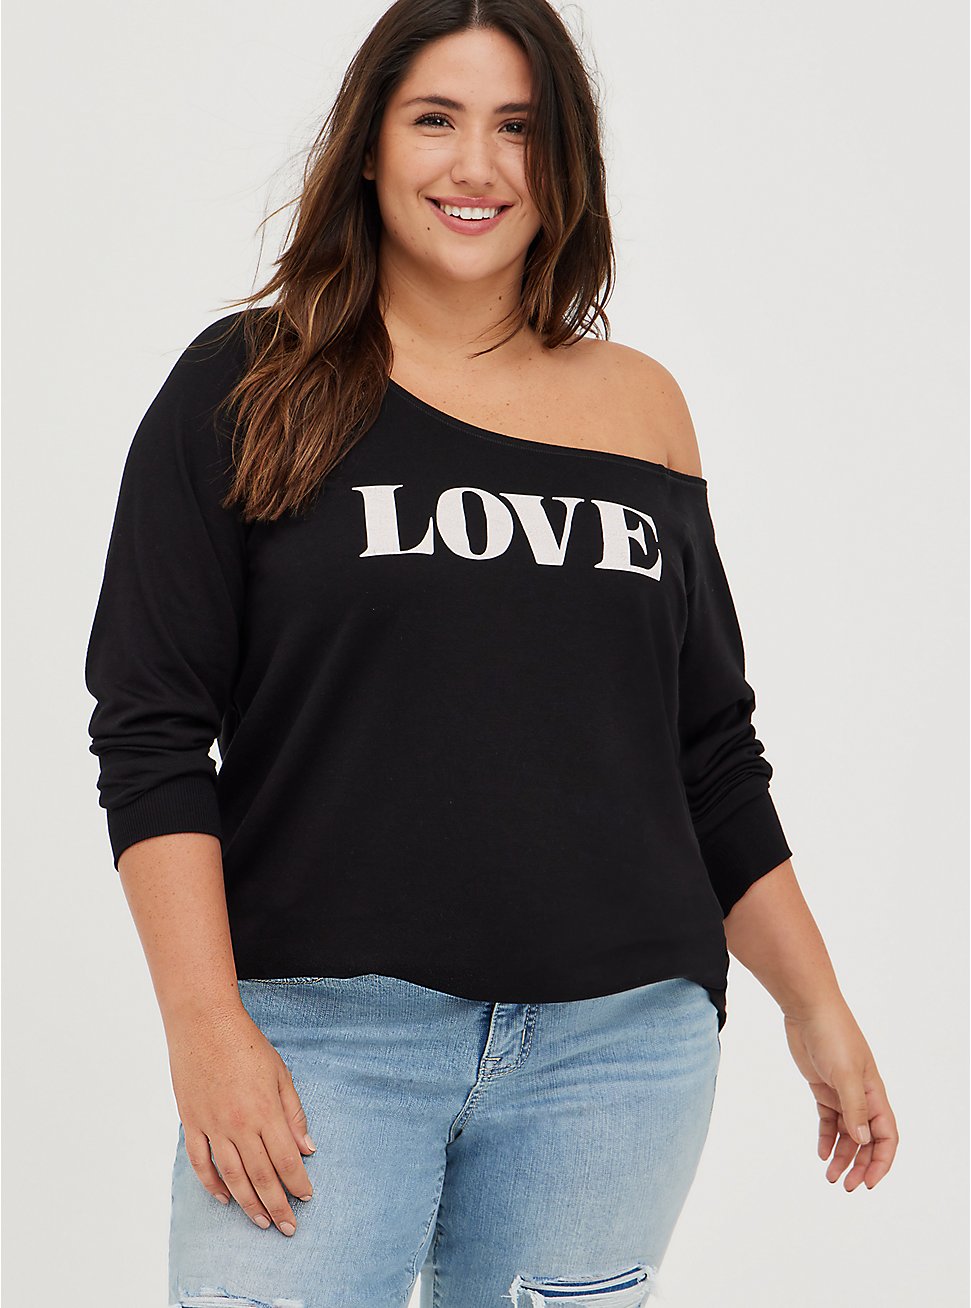 Plus Size Graphic Classic Fit Lt Weight French Terry Off-Shoulder Sweatshirt, BCA LOVE BLACK, hi-res